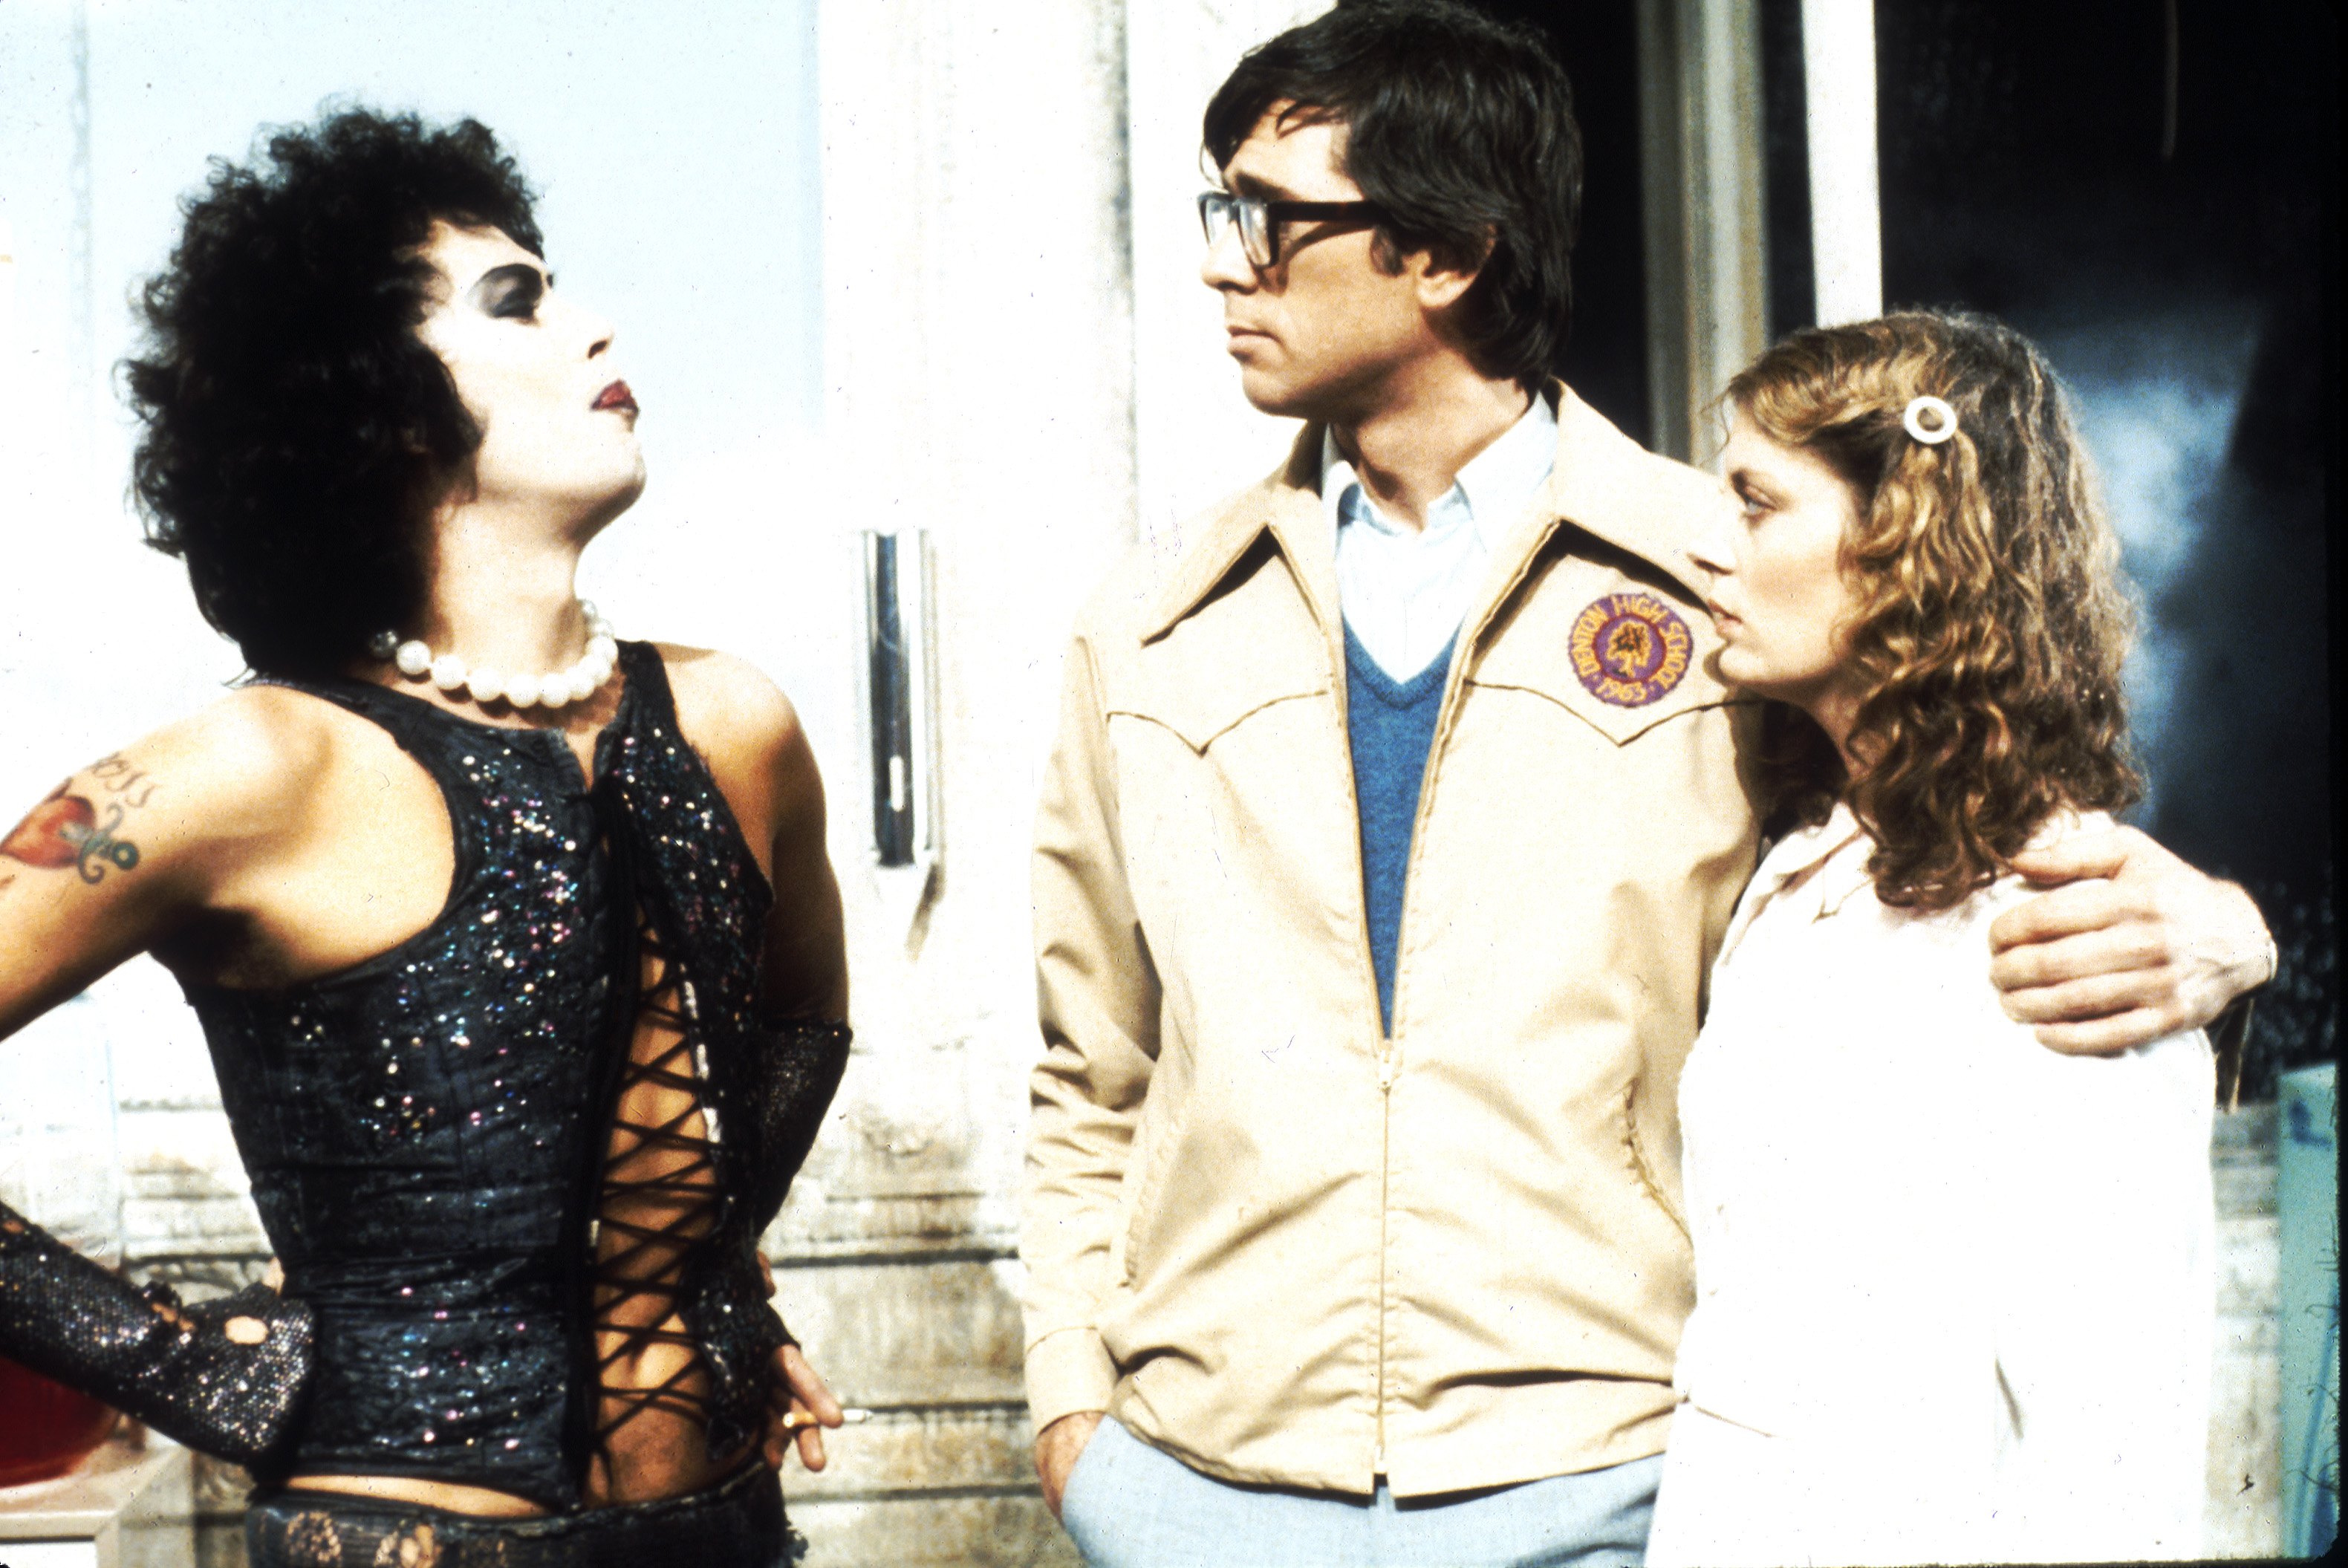 1975: Actors Tim Curry, Barry Bostwick and Susan Sarandon in scene from movie "The Rocky Horror Picture Show" directed by Jim Sharman. (Michael Ochs Archives—Getty Images)